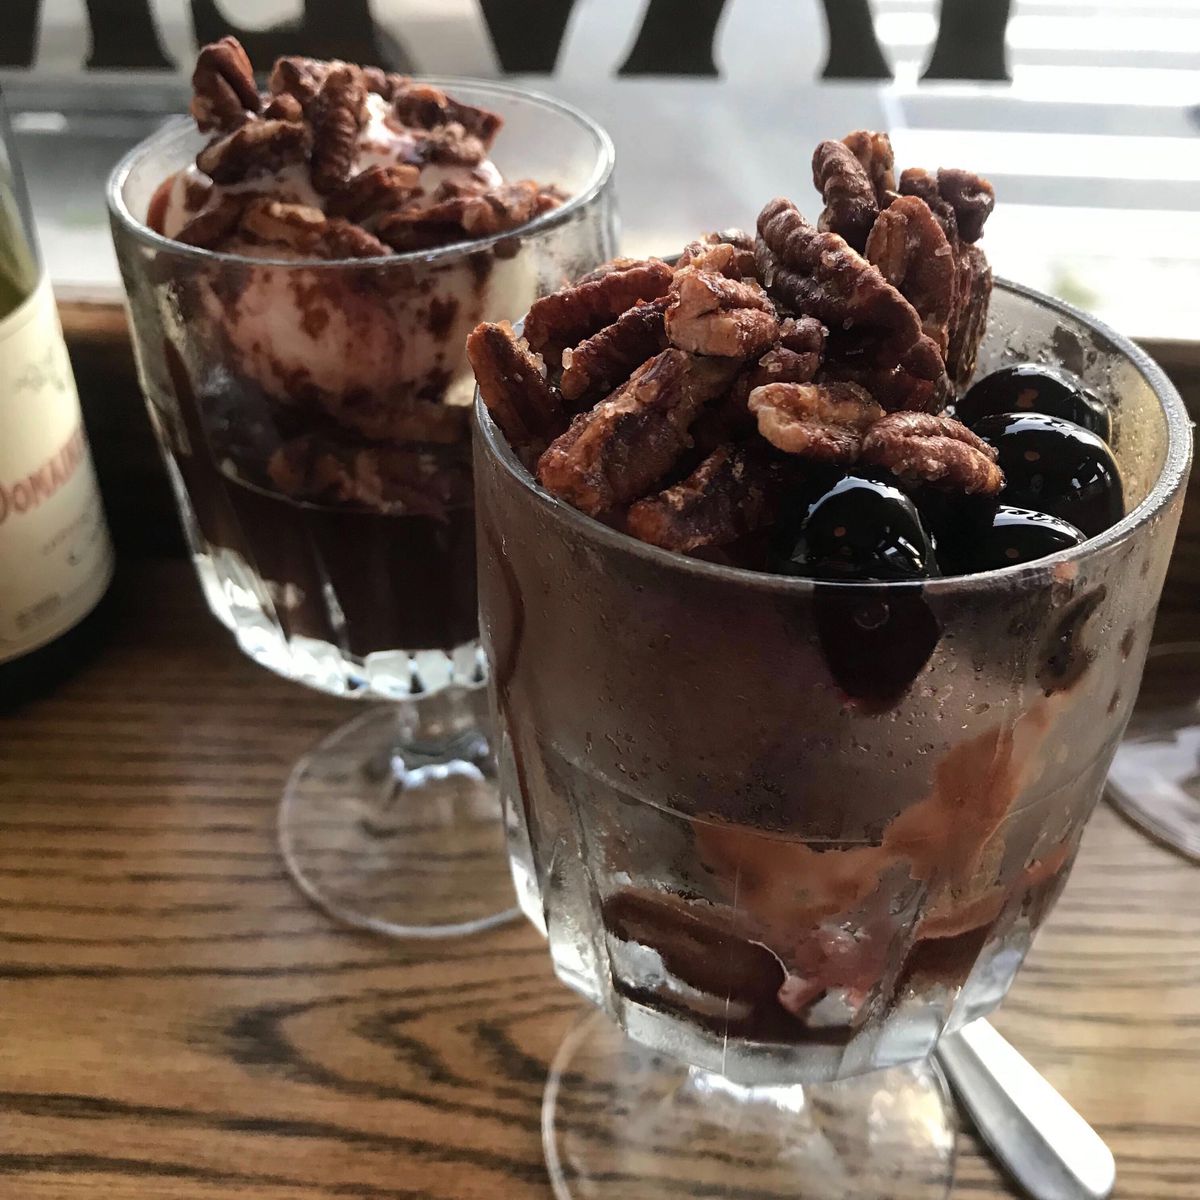 A pair of gelato sundaes topped with pecans